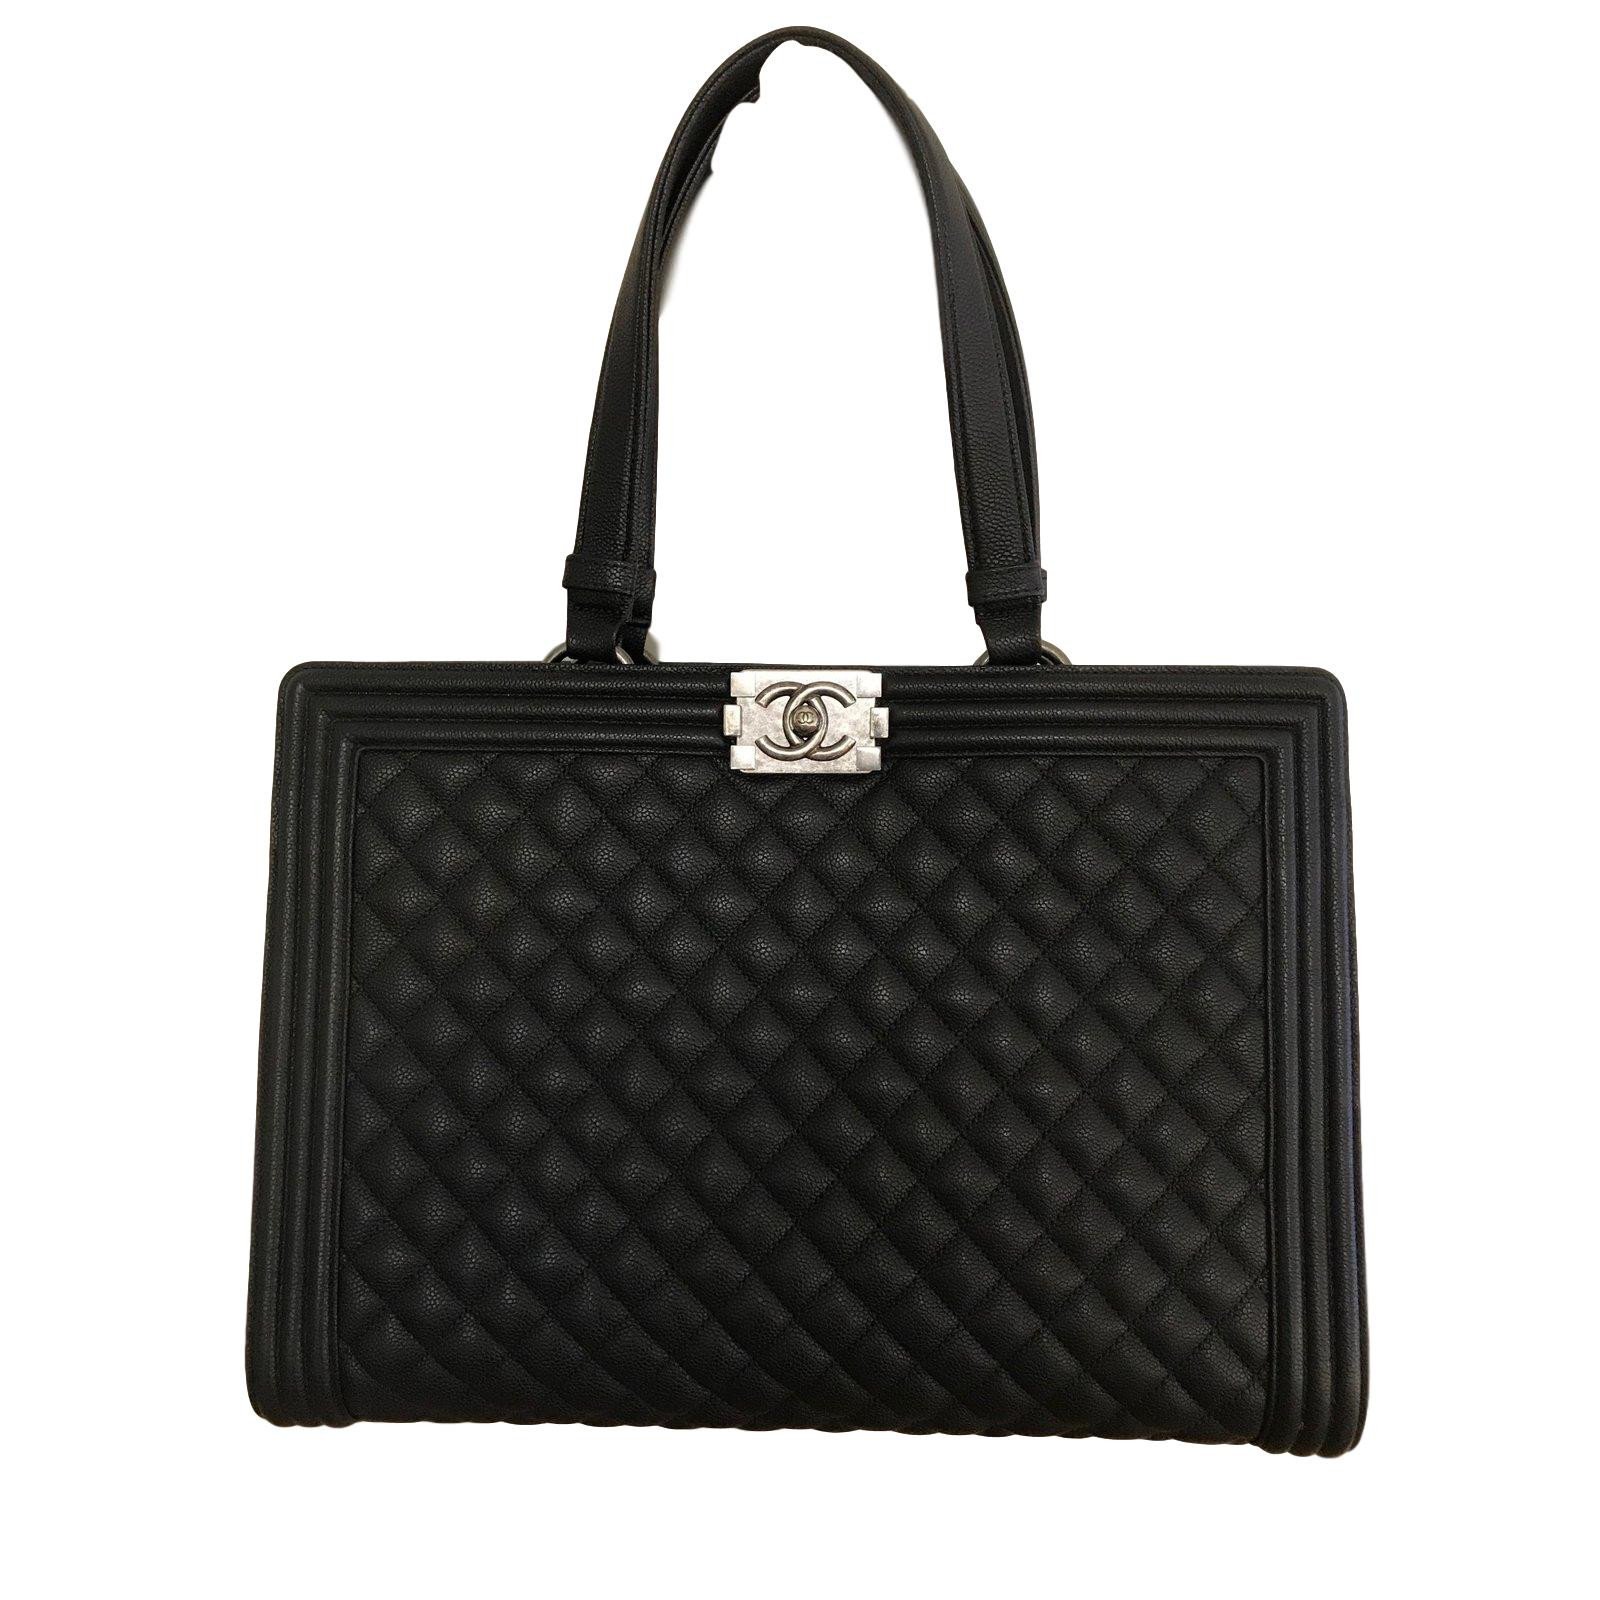 CHANEL Black Quilted Calfskin Boy Large Shopping Tote Bag in grained leather